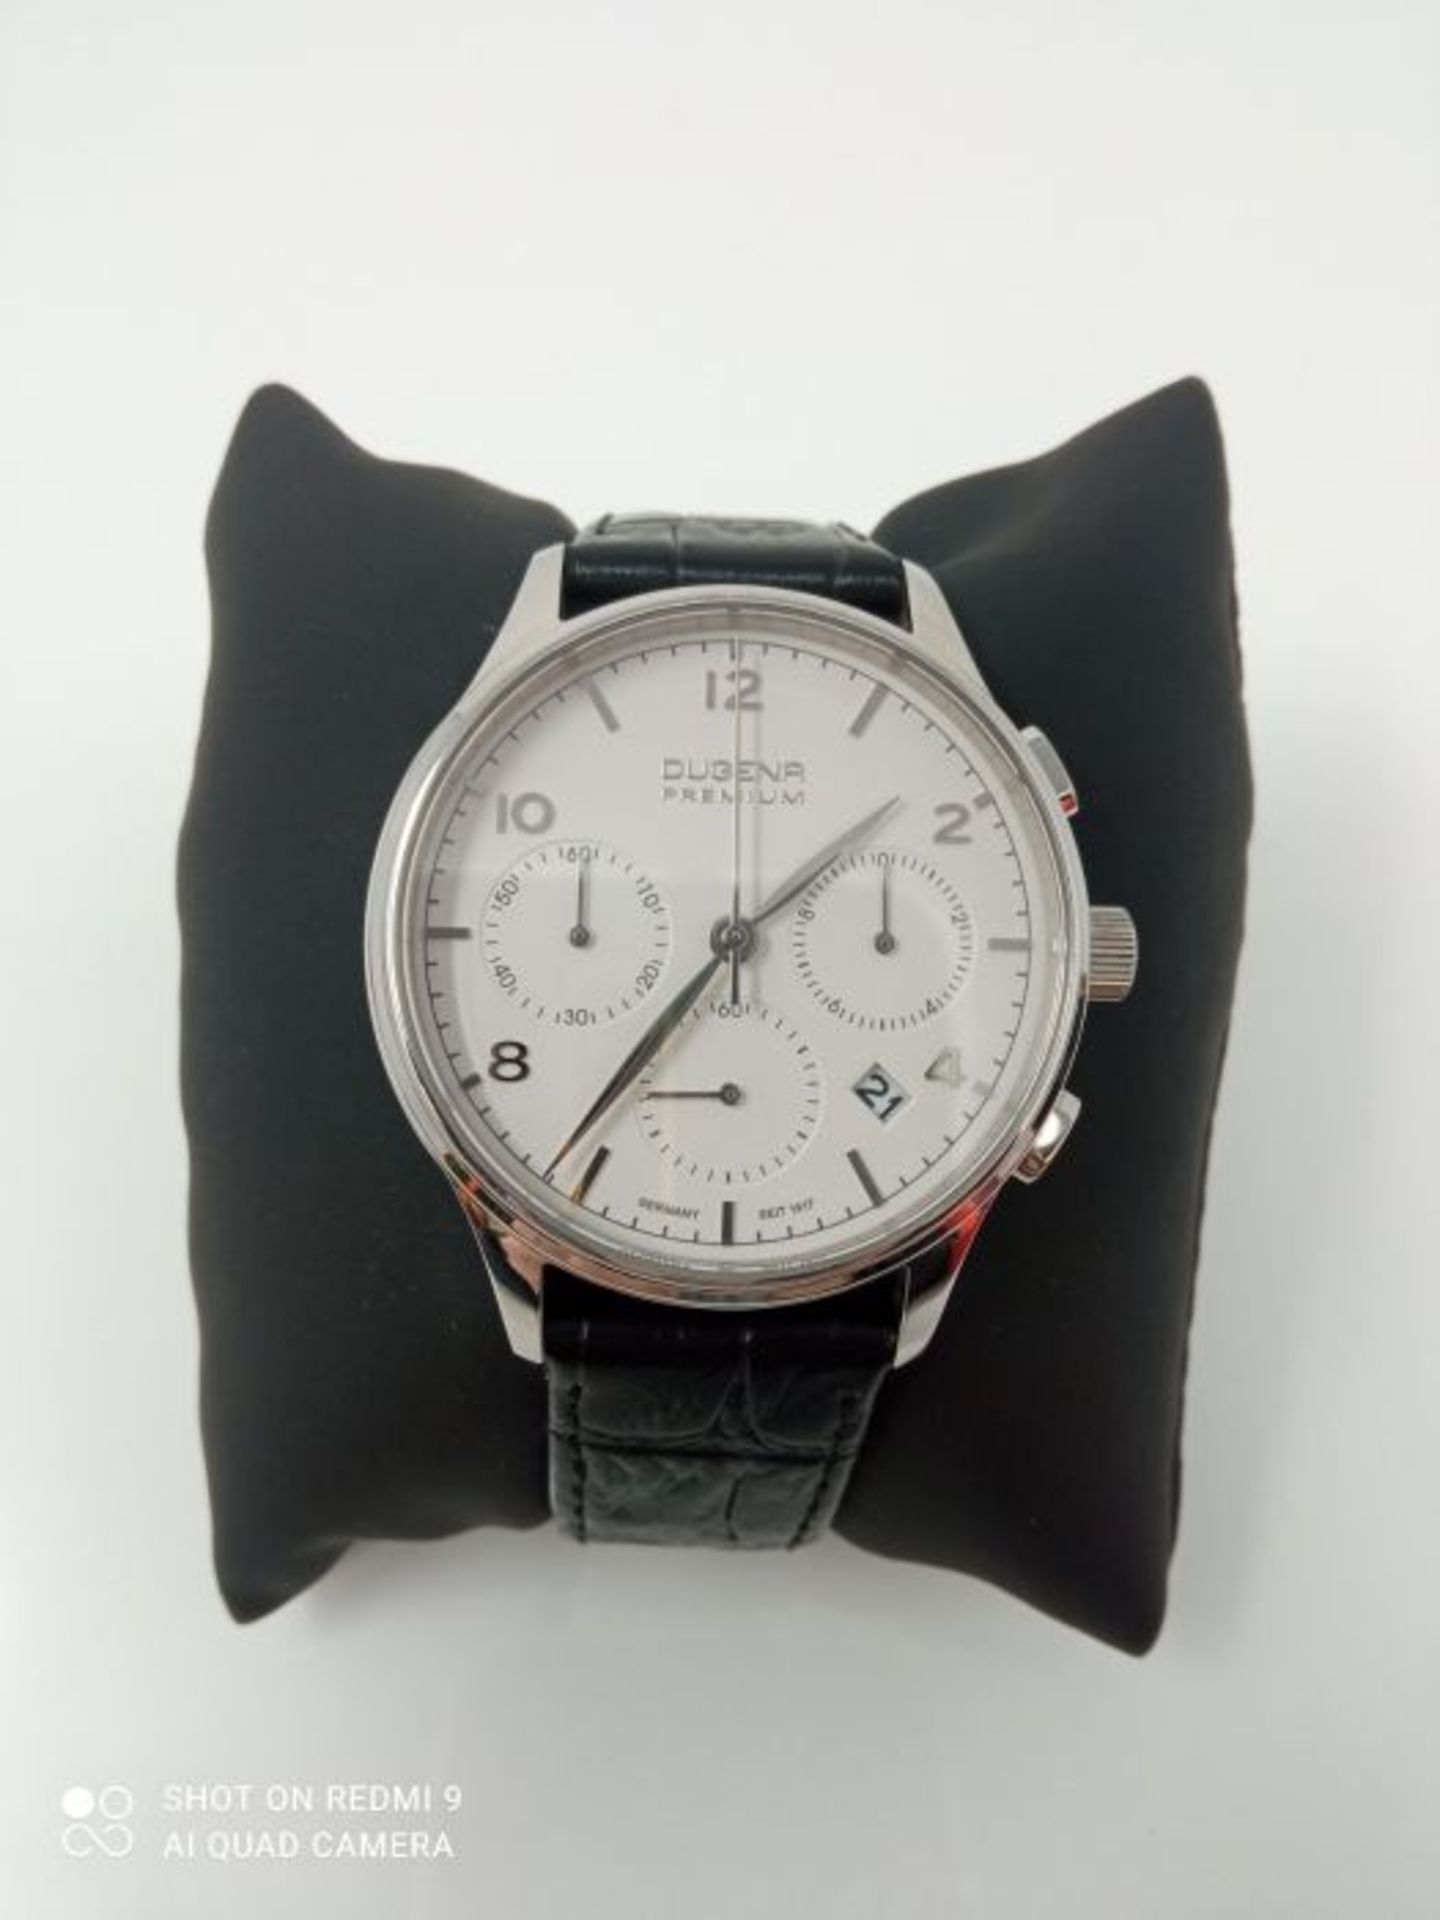 RRP £188.00 Dugena Men's Dugena Premium Quartz Watch with Silver Dial Chronograph Display and Blac - Image 2 of 2